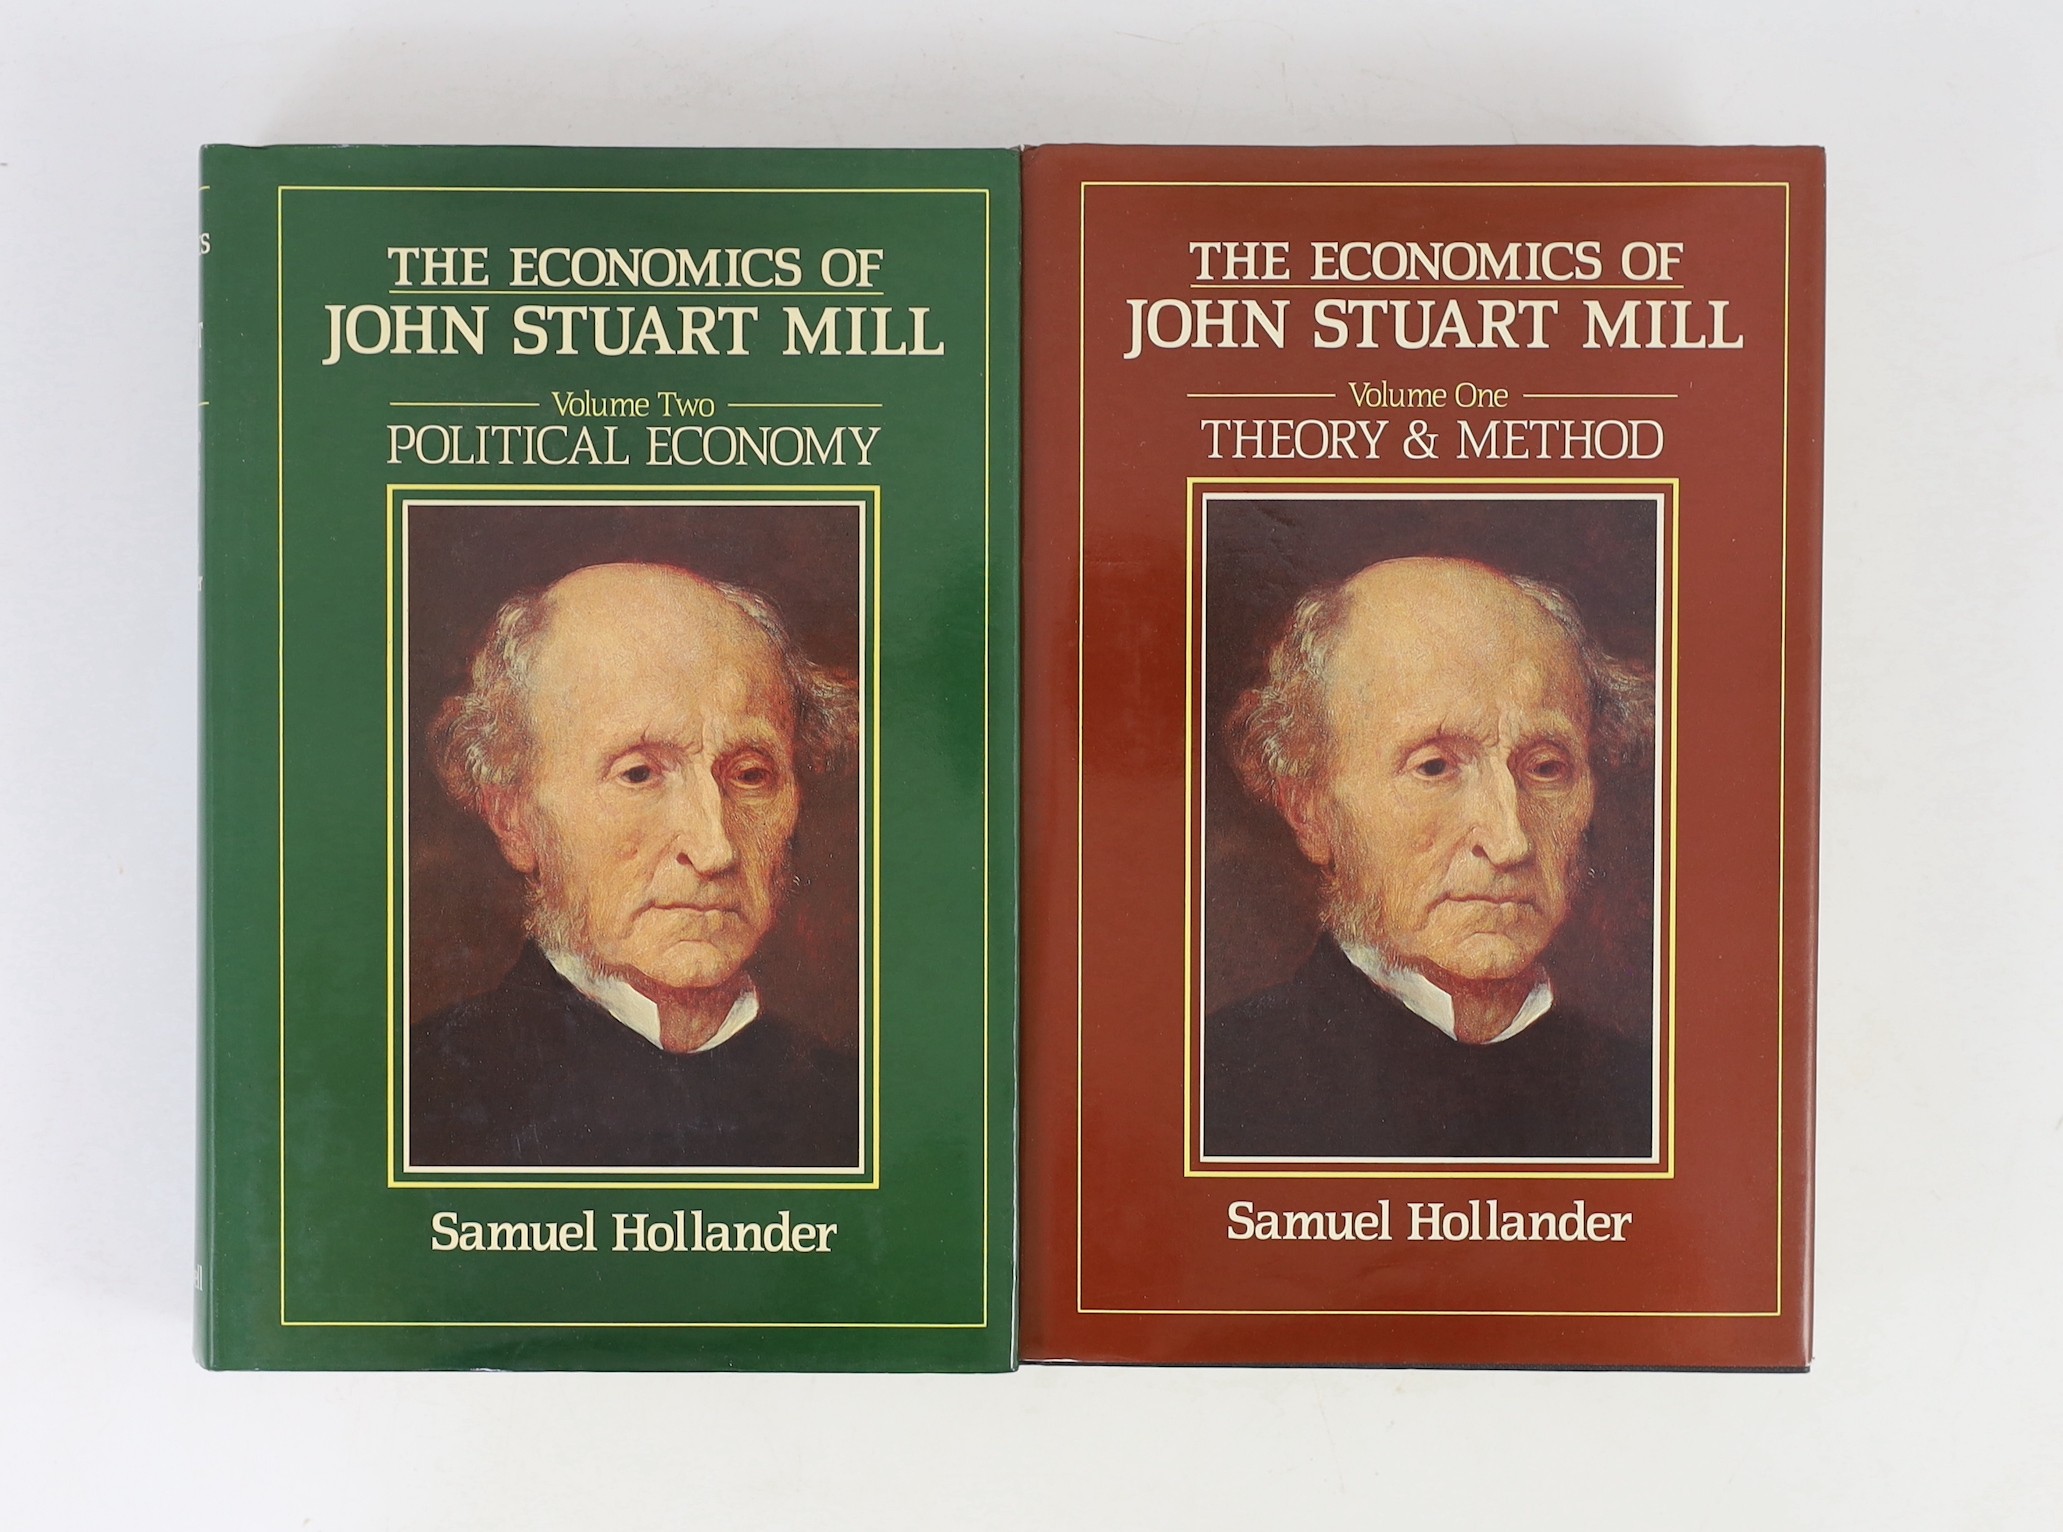 Hollander, Samuel - The Economics of John Stuart Mill. 2 vols. publisher's cloth and d/wrappers. 1985; Mill, John Stuart - The Collected Works.....vols. 2, 3 and 5 (only) introductions V.W. Bladen and edited by J.M. Robs